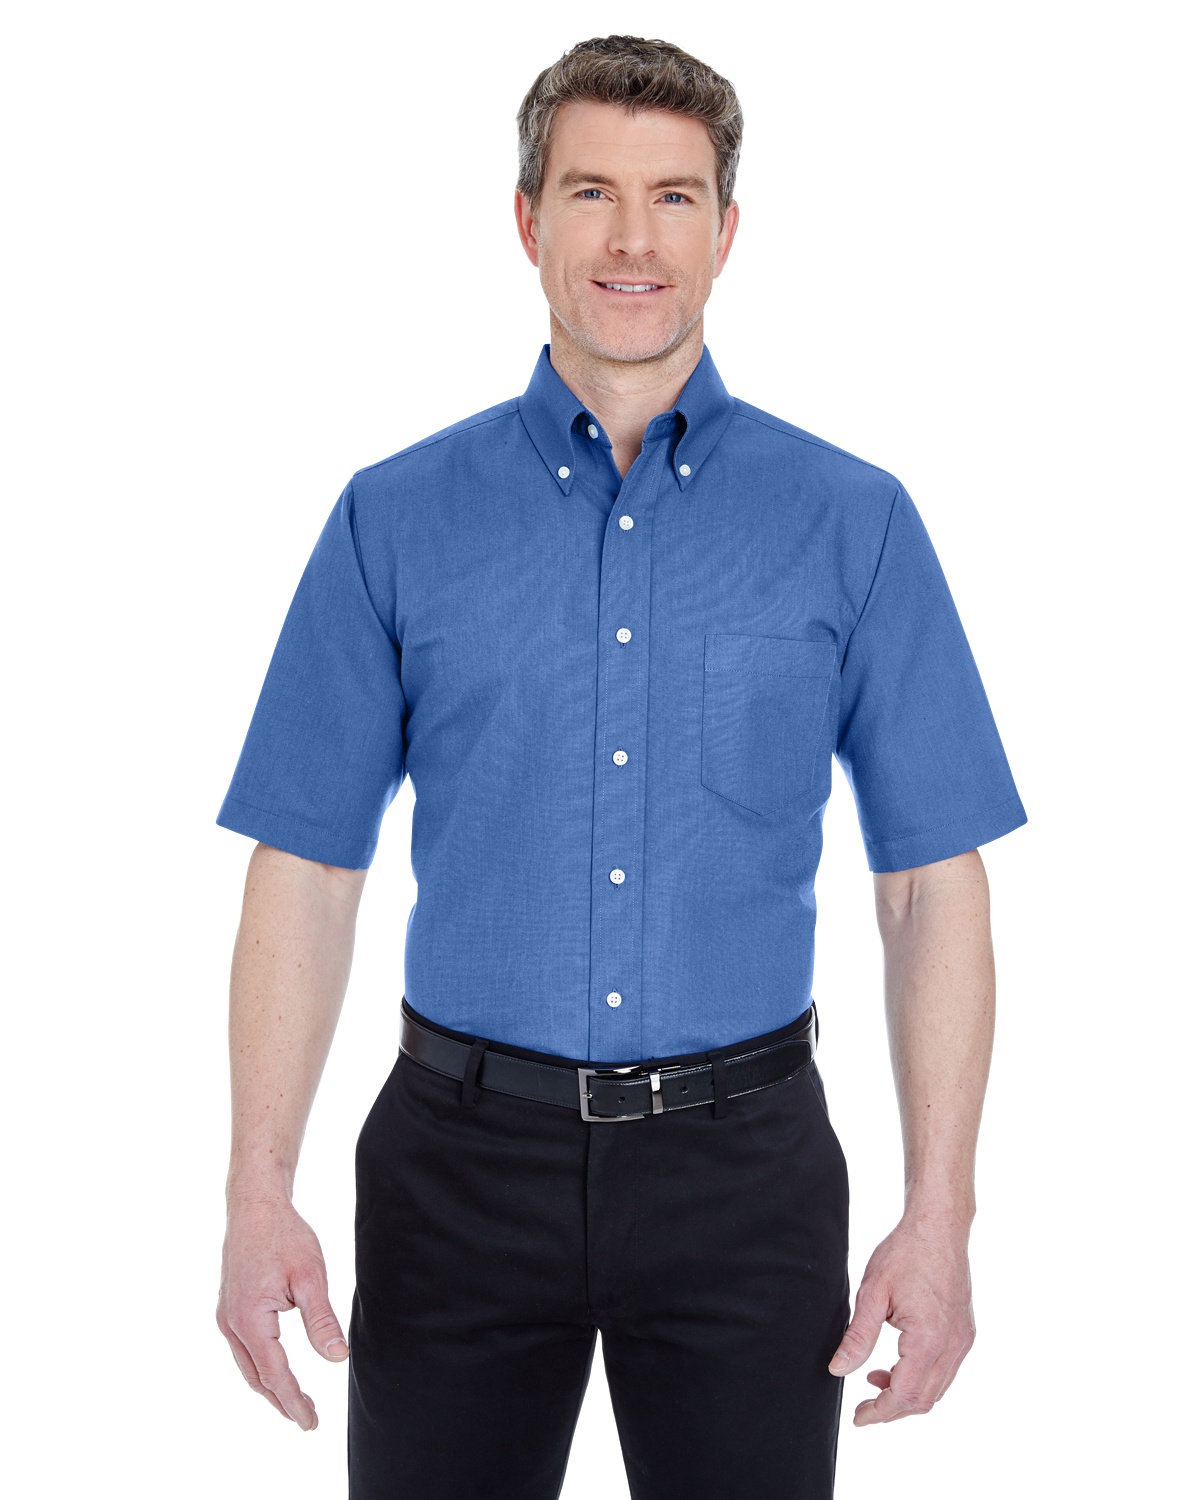 'UltraClub 8972T Men's Tall Classic Wrinkle-Resistant Short-Sleeve Oxford'